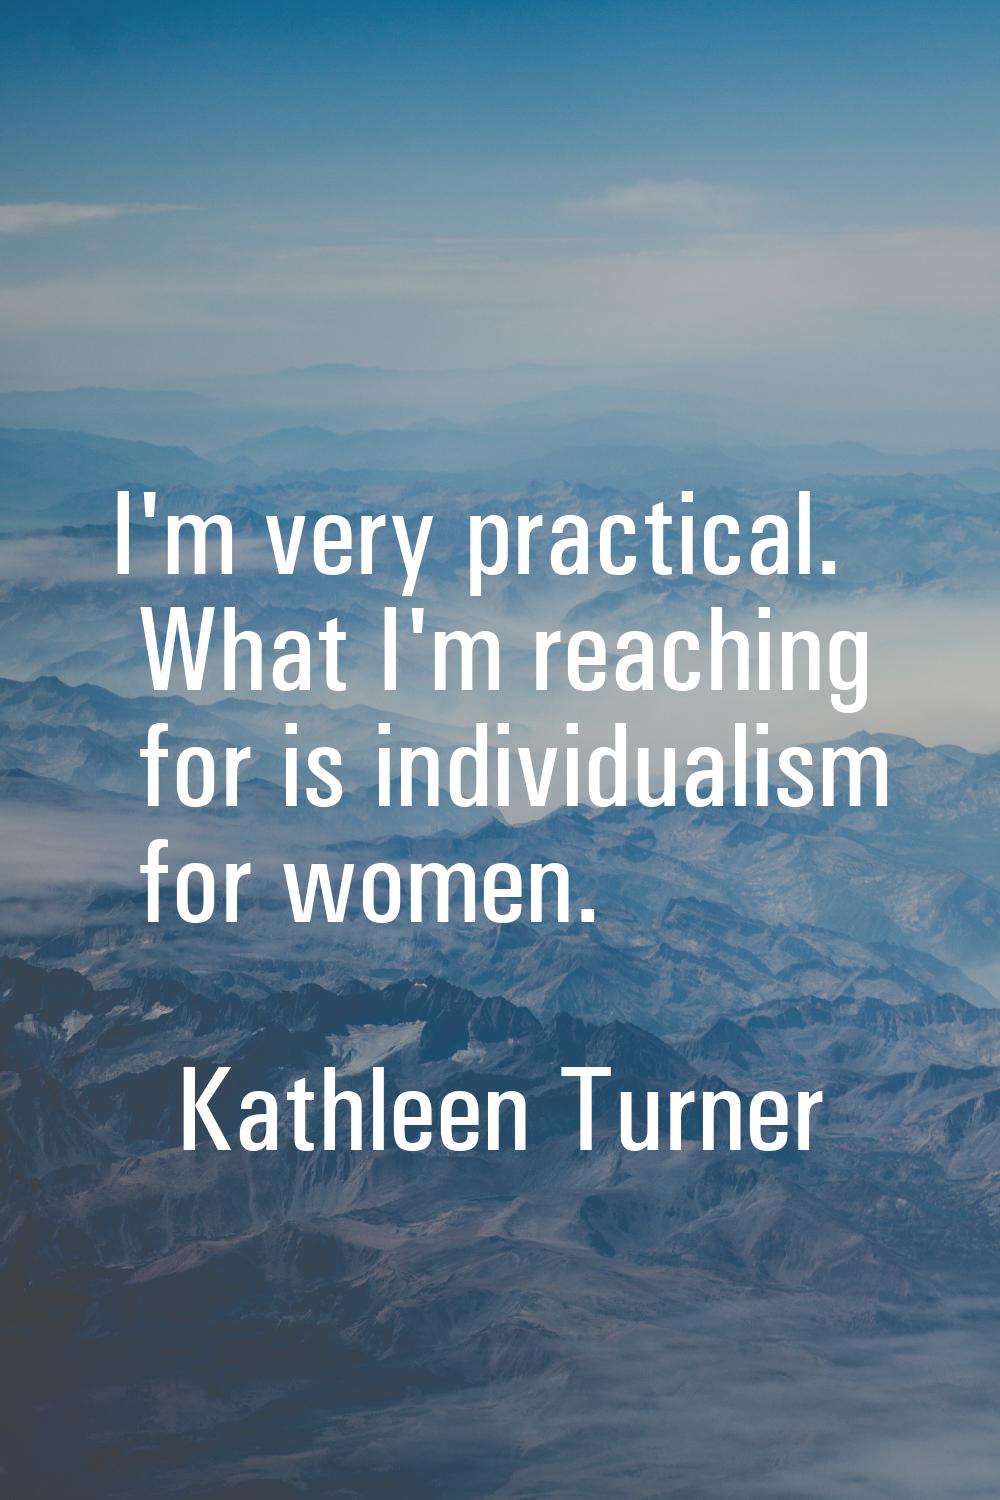 I'm very practical. What I'm reaching for is individualism for women.